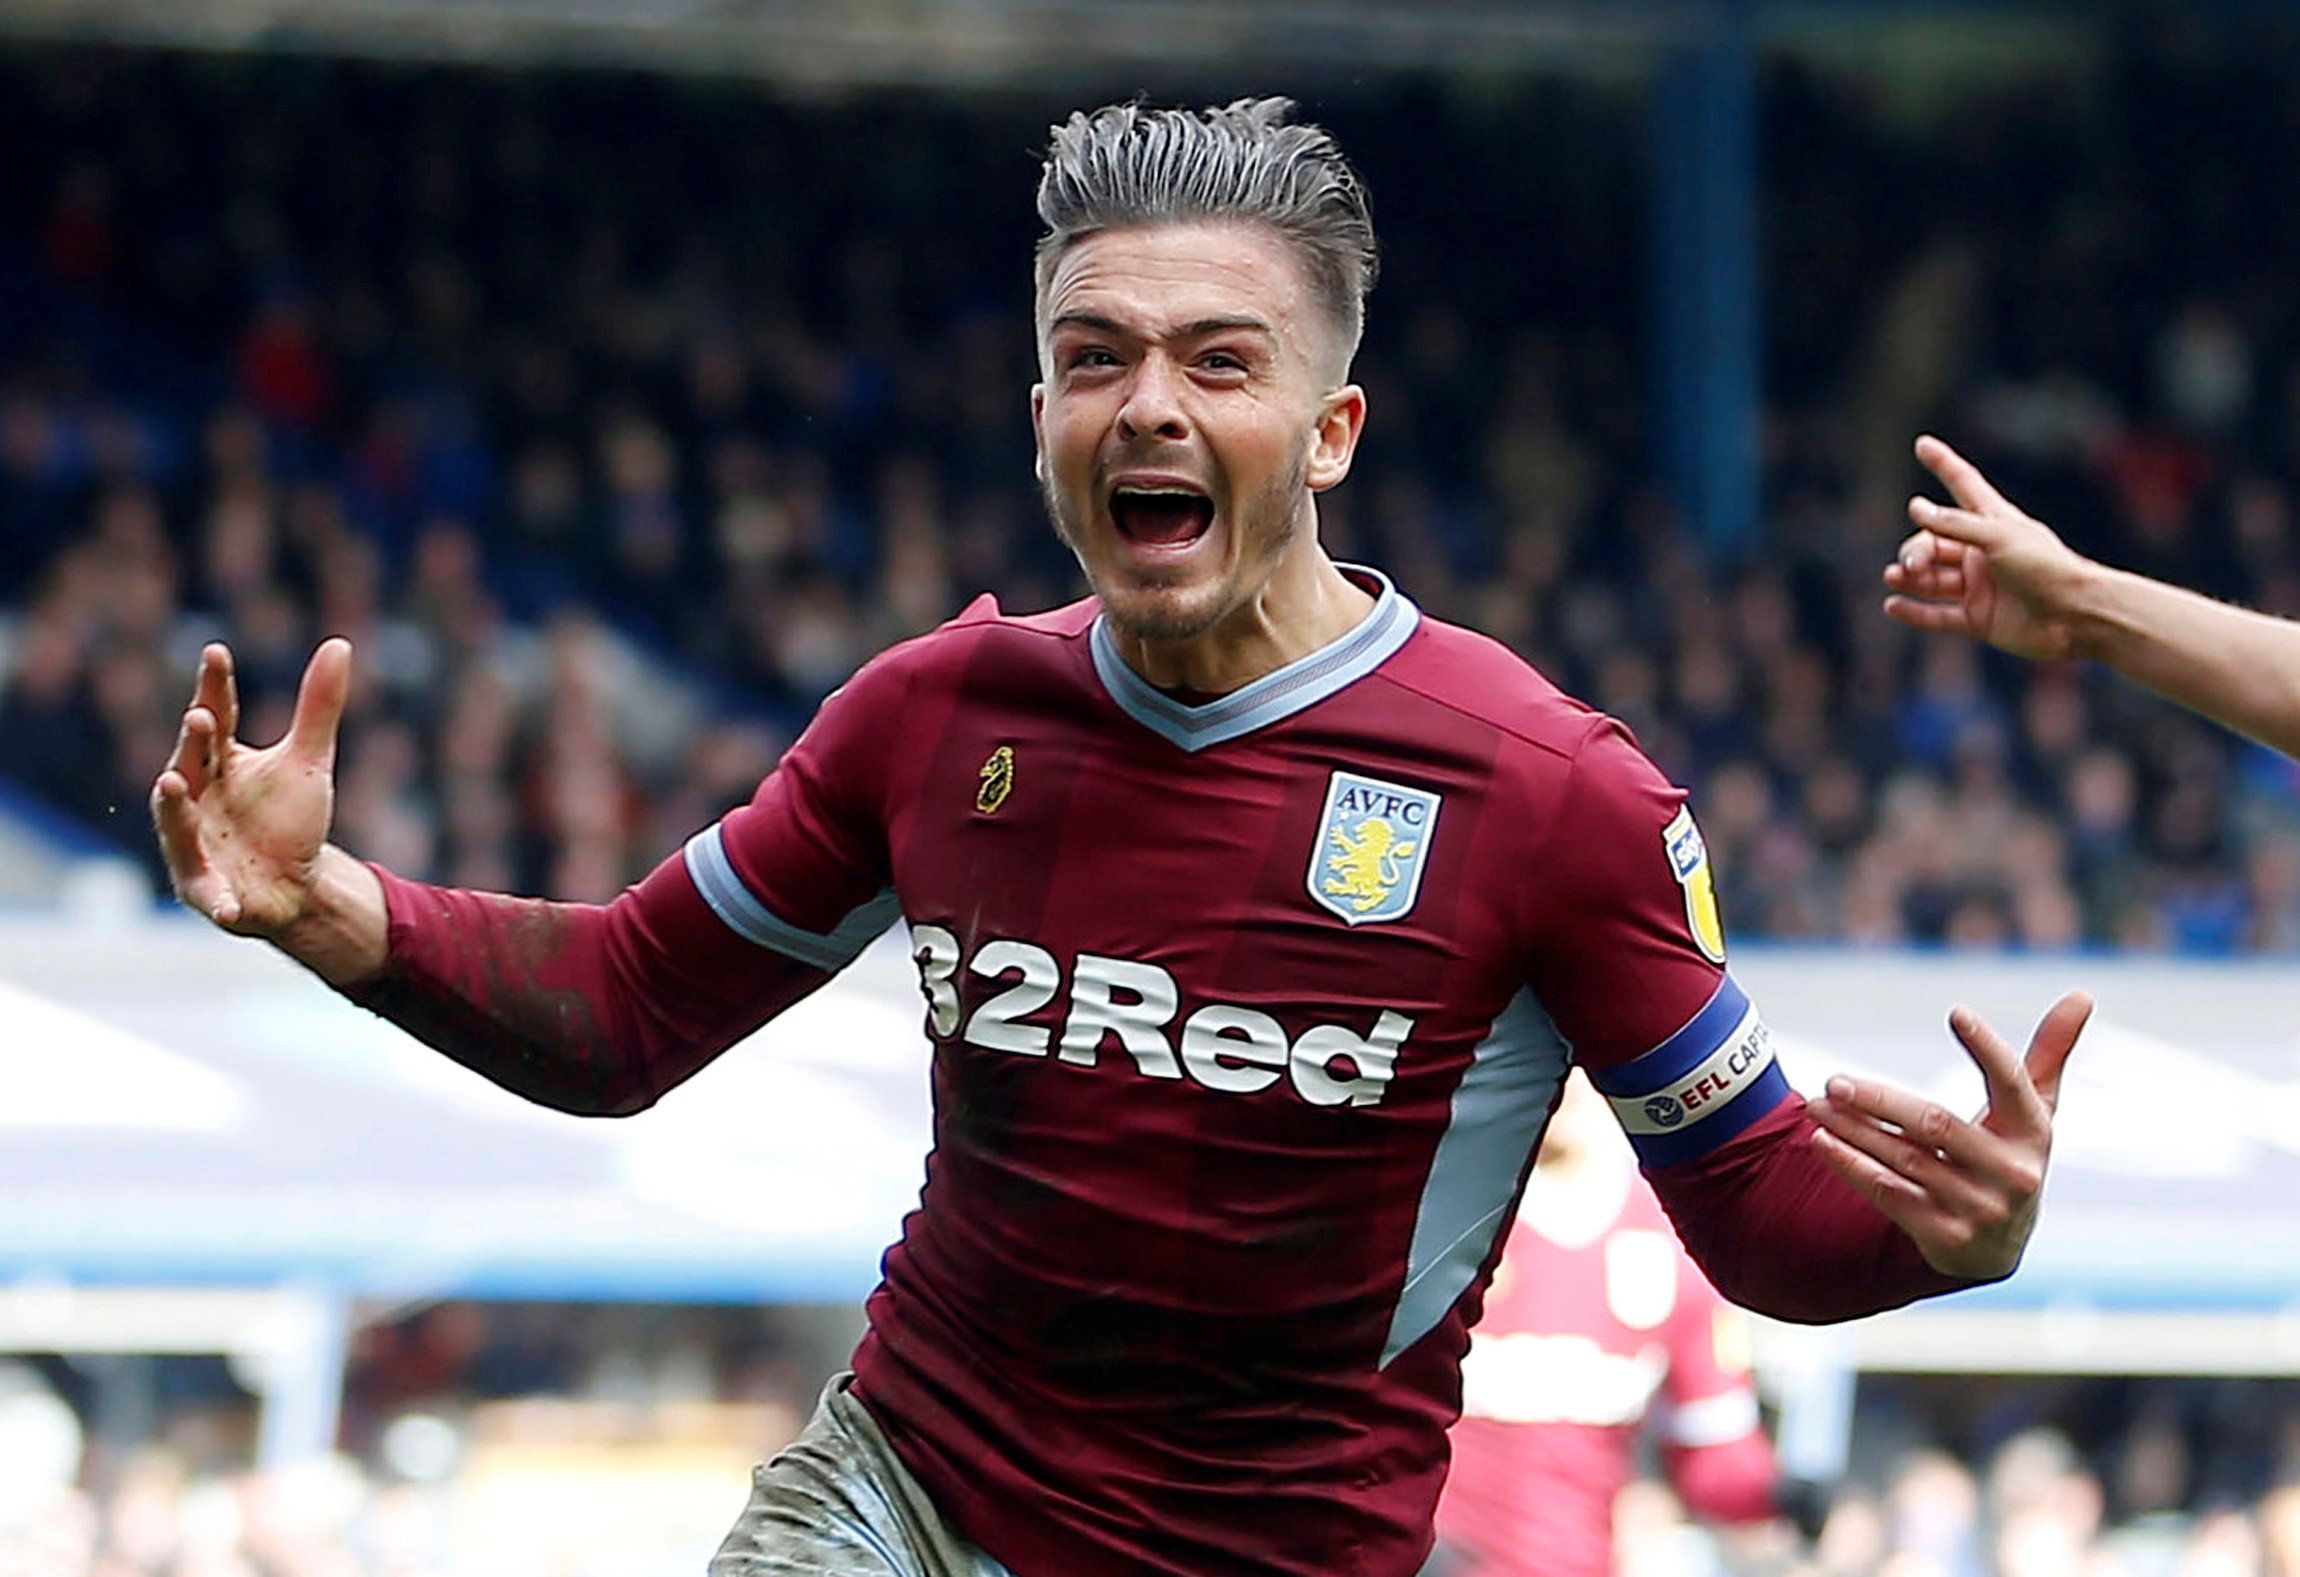 Soccer Football - Championship - Birmingham City v Aston Villa - St Andrew's, Birmingham, Britain - March 10, 2019   Aston Villa's Jack Grealish celebrates scoring their first goal    Action Images via Reuters/Craig Brough    EDITORIAL USE ONLY. No use with unauthorized audio, video, data, fixture lists, club/league logos or "live" services. Online in-match use limited to 75 images, no video emulation. No use in betting, games or single club/league/player publications.  Please contact your accou